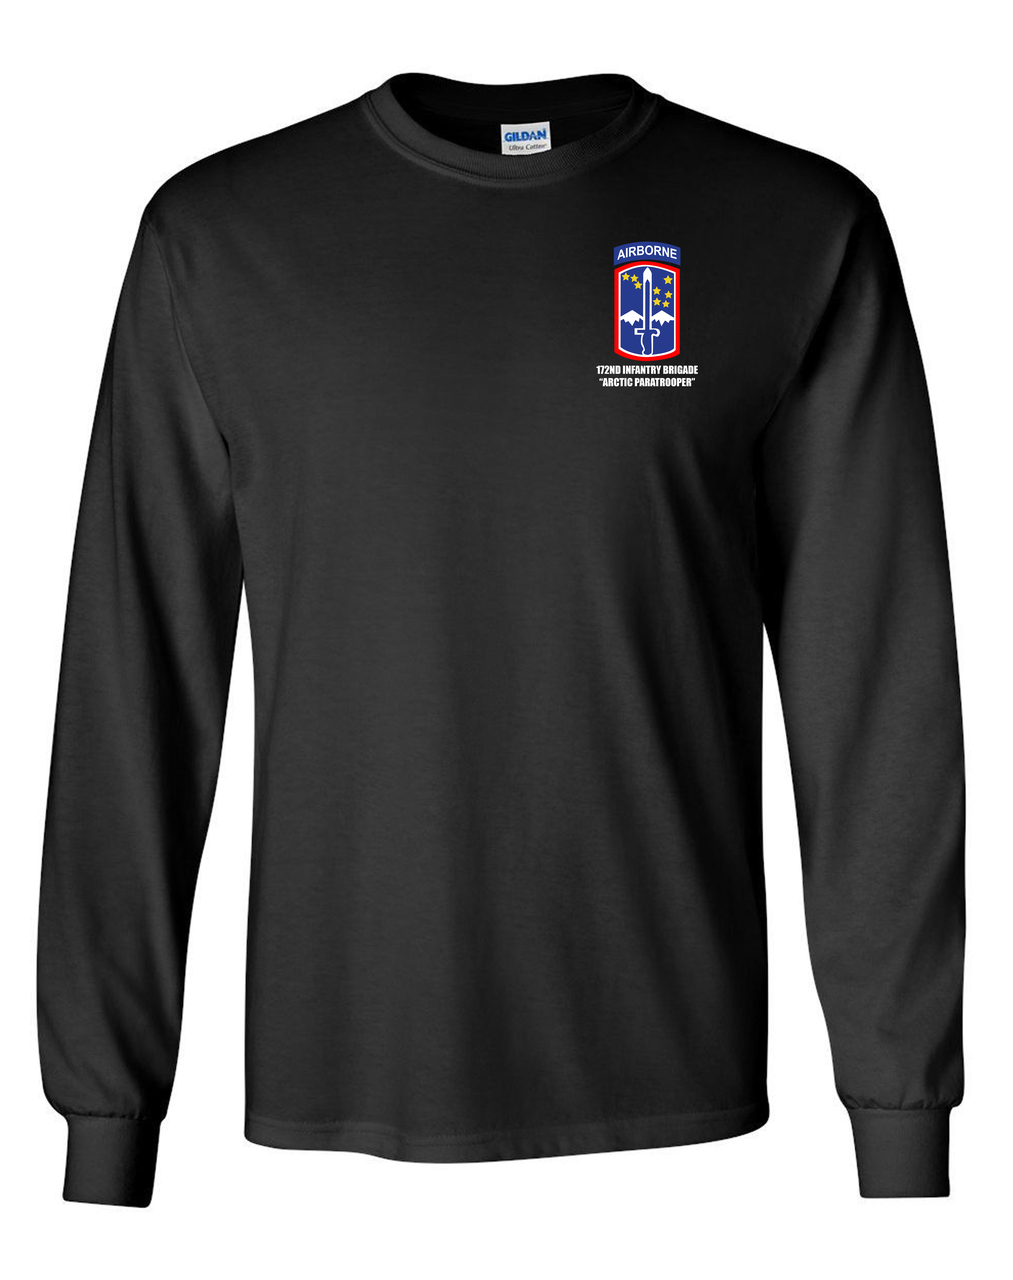 172nd Infantry Brigade (Airborne) Long-Sleeve Cotton T-Shirt